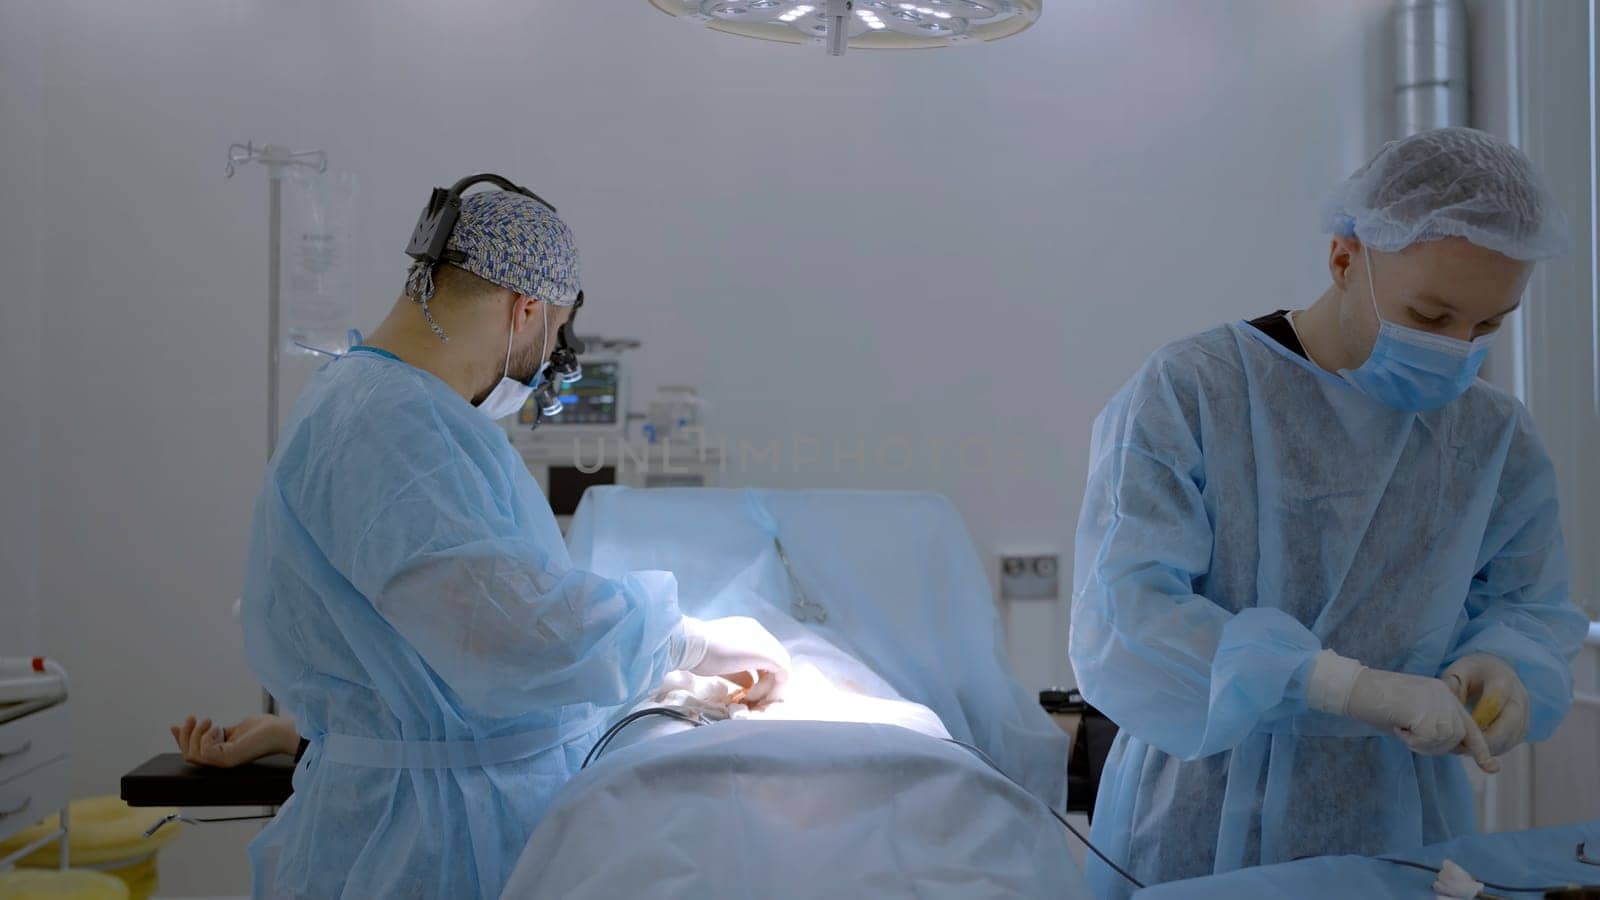 Two male surgeons in a special uniform performing medical procedure. Action. Concept of healthcare and medicine